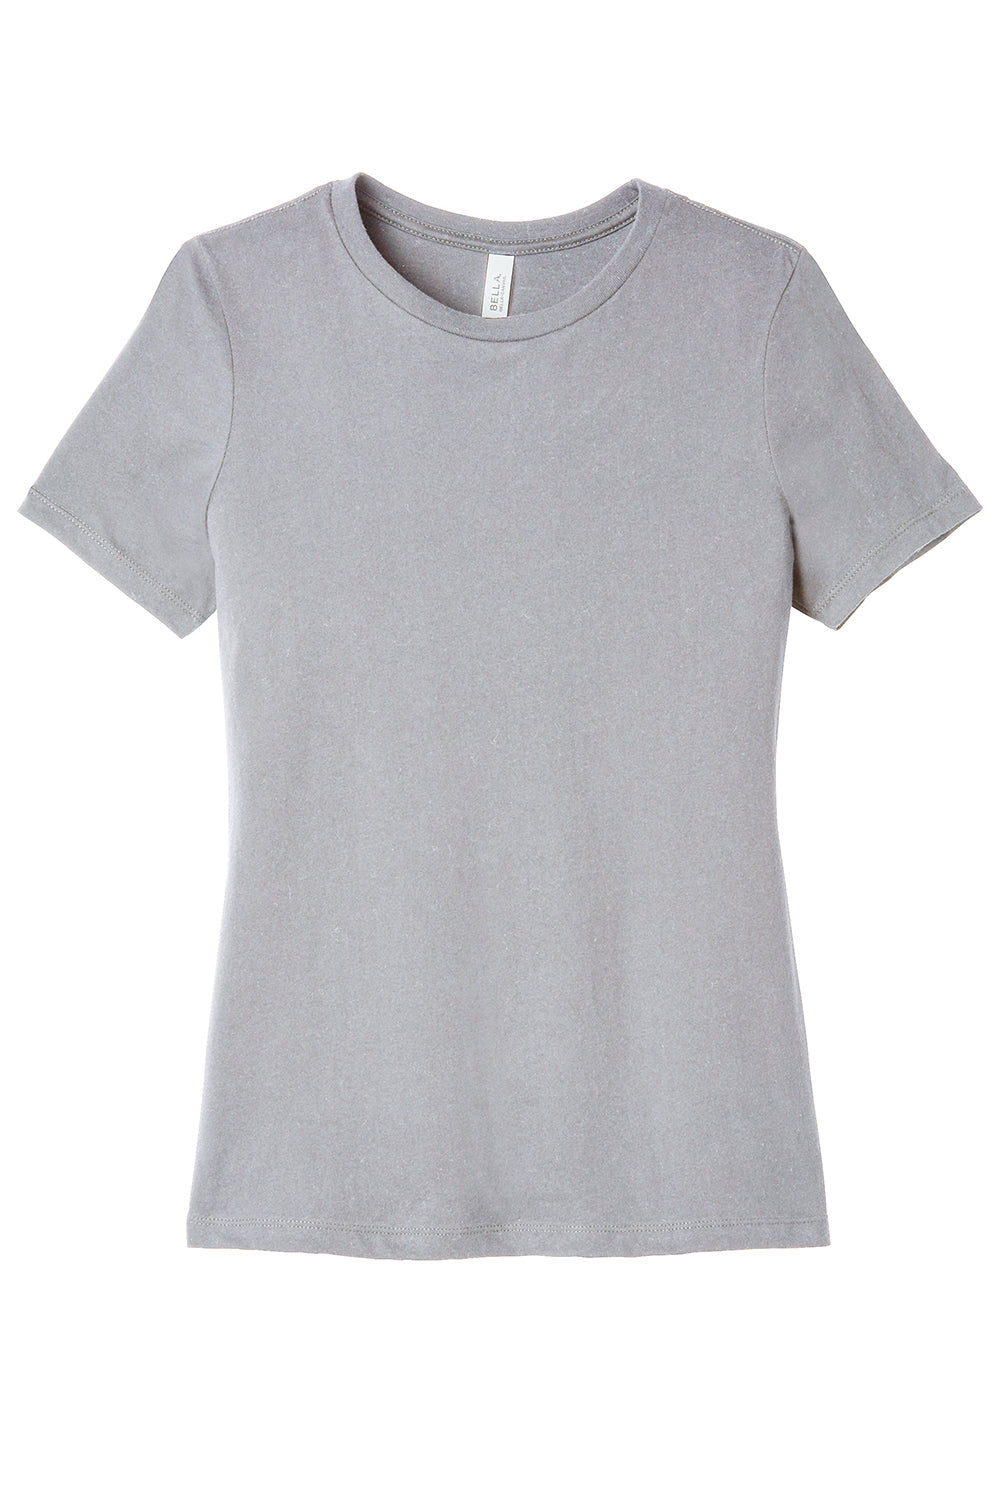 Bella + Canvas BC6400/B6400/6400 Womens Relaxed Jersey Short Sleeve Crewneck T-Shirt Solid Athletic Grey Flat Front